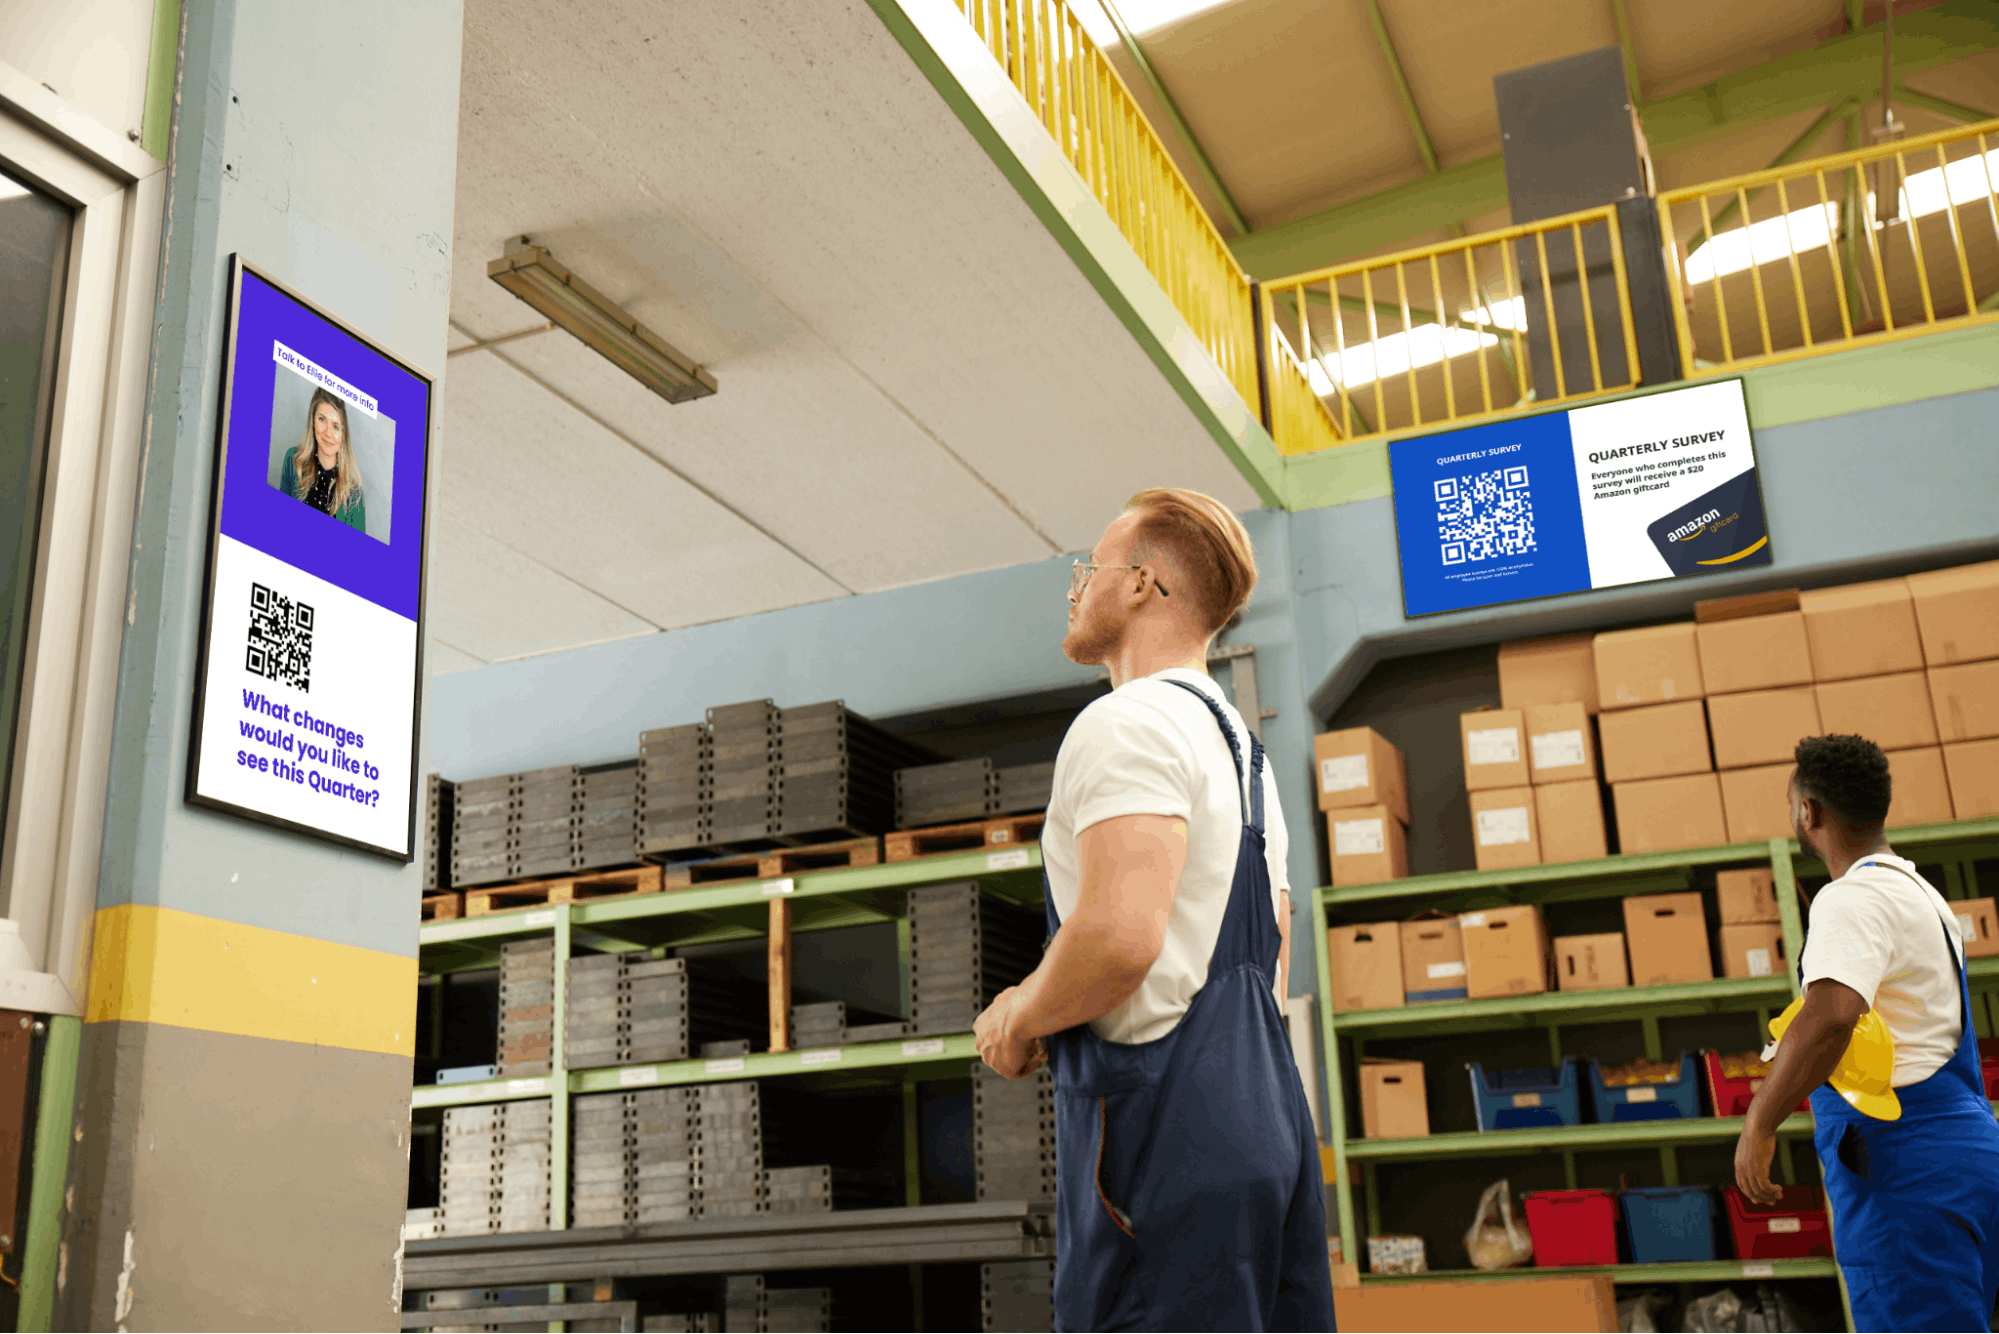 ScreenCloud Article - How to elevate your digital employee experience with digital signage